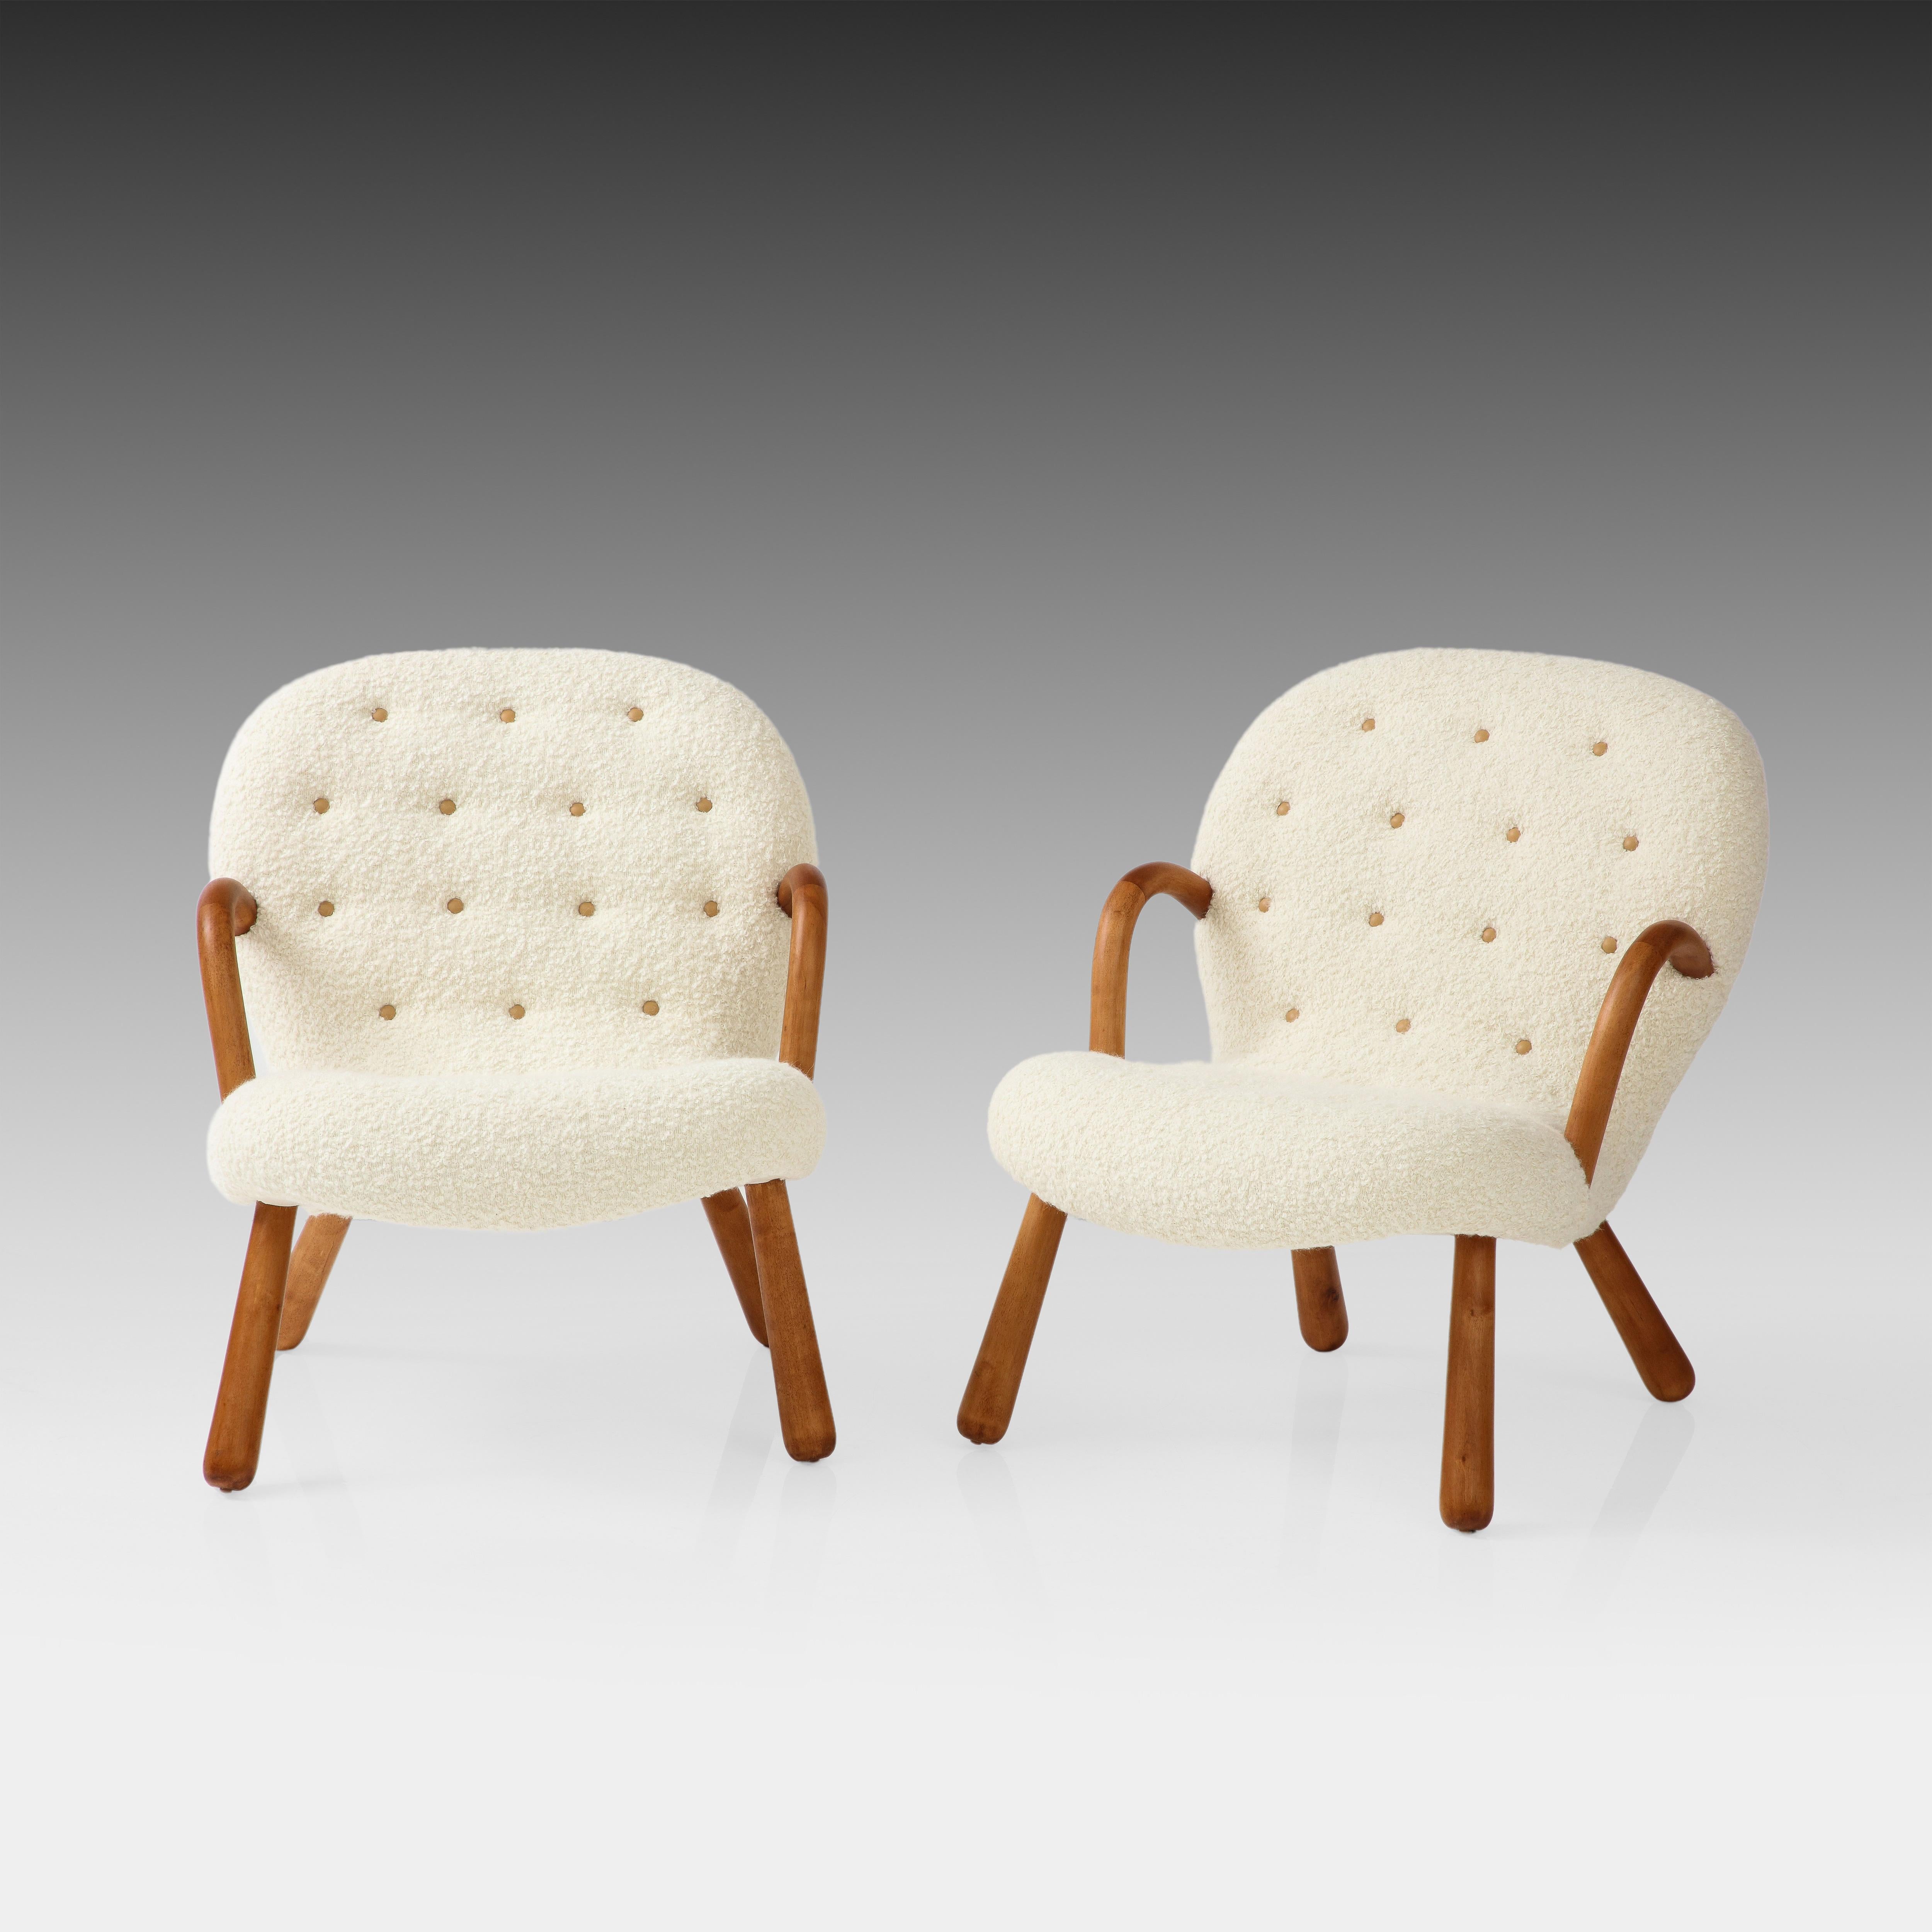 Arnold Madsen for Madsen & Schubell rare pair of Clam chairs with beech arms and legs and upholstered in ivory bouclé with camel leather buttons on back and seat, Denmark. 1944. These iconic Clam chairs have a characteristic organic shape with soft